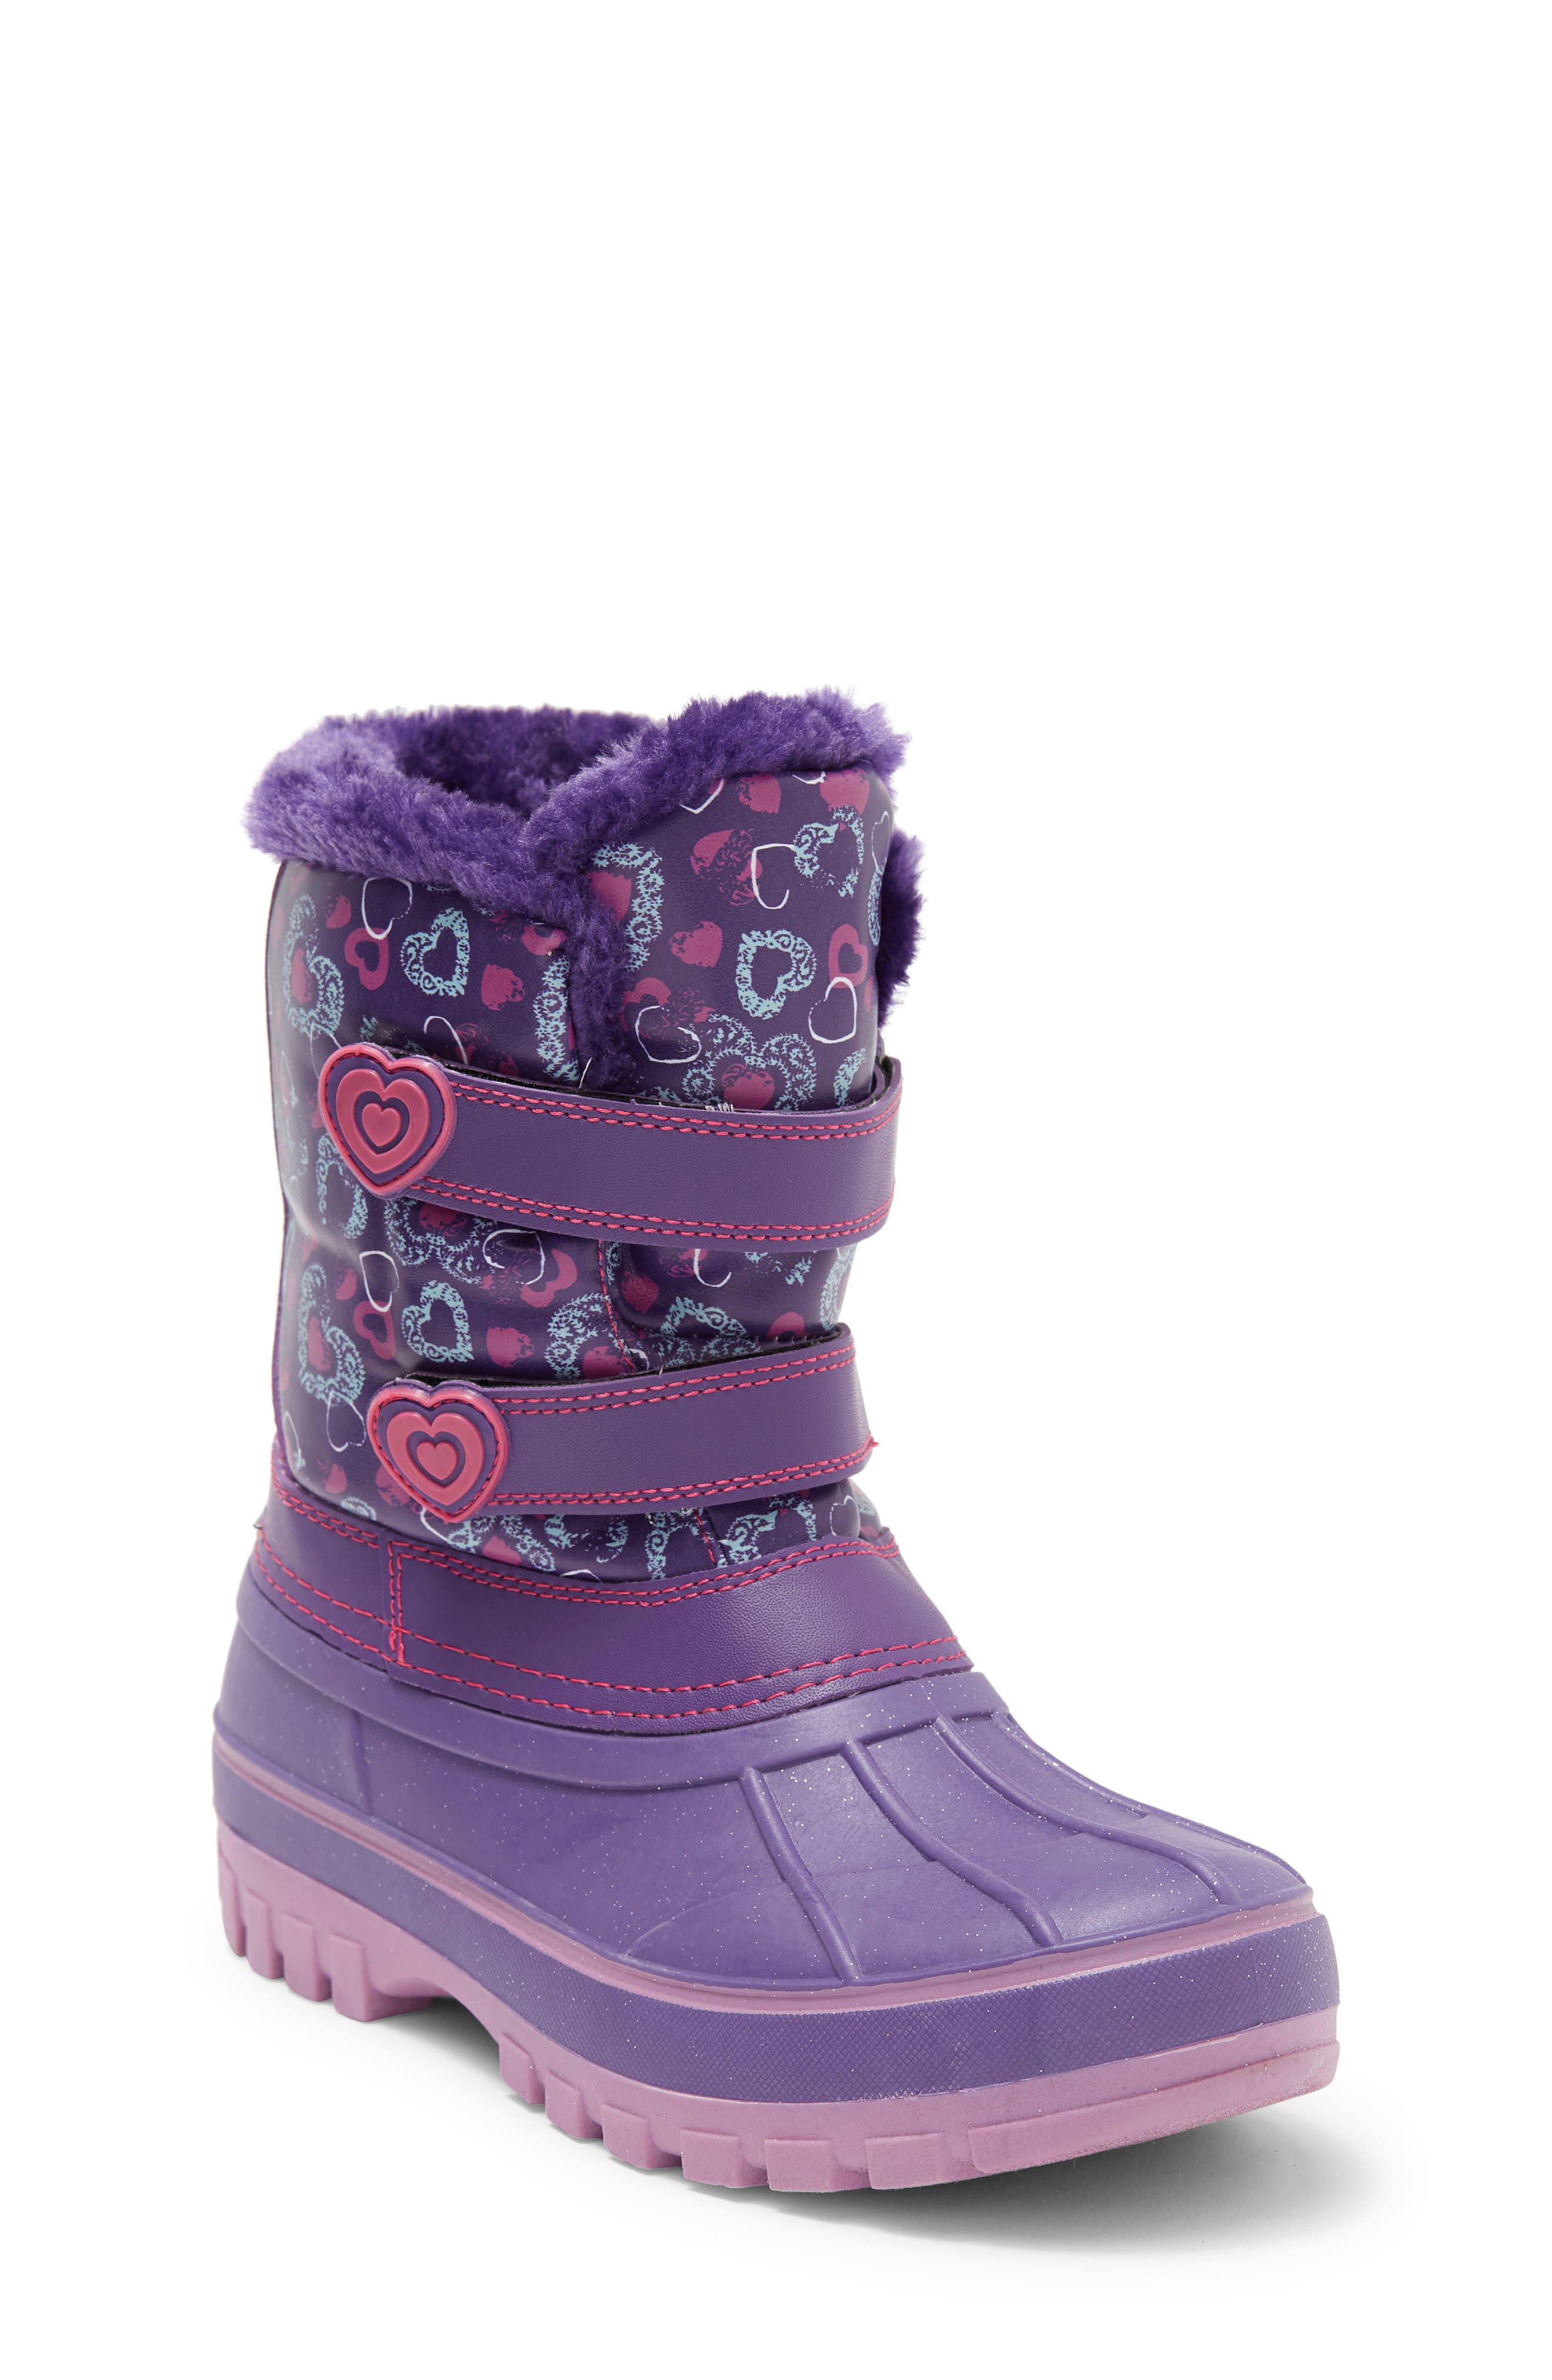 Kids' Ducko Faux Fur Lined Snow Boot DREAM PAIRS